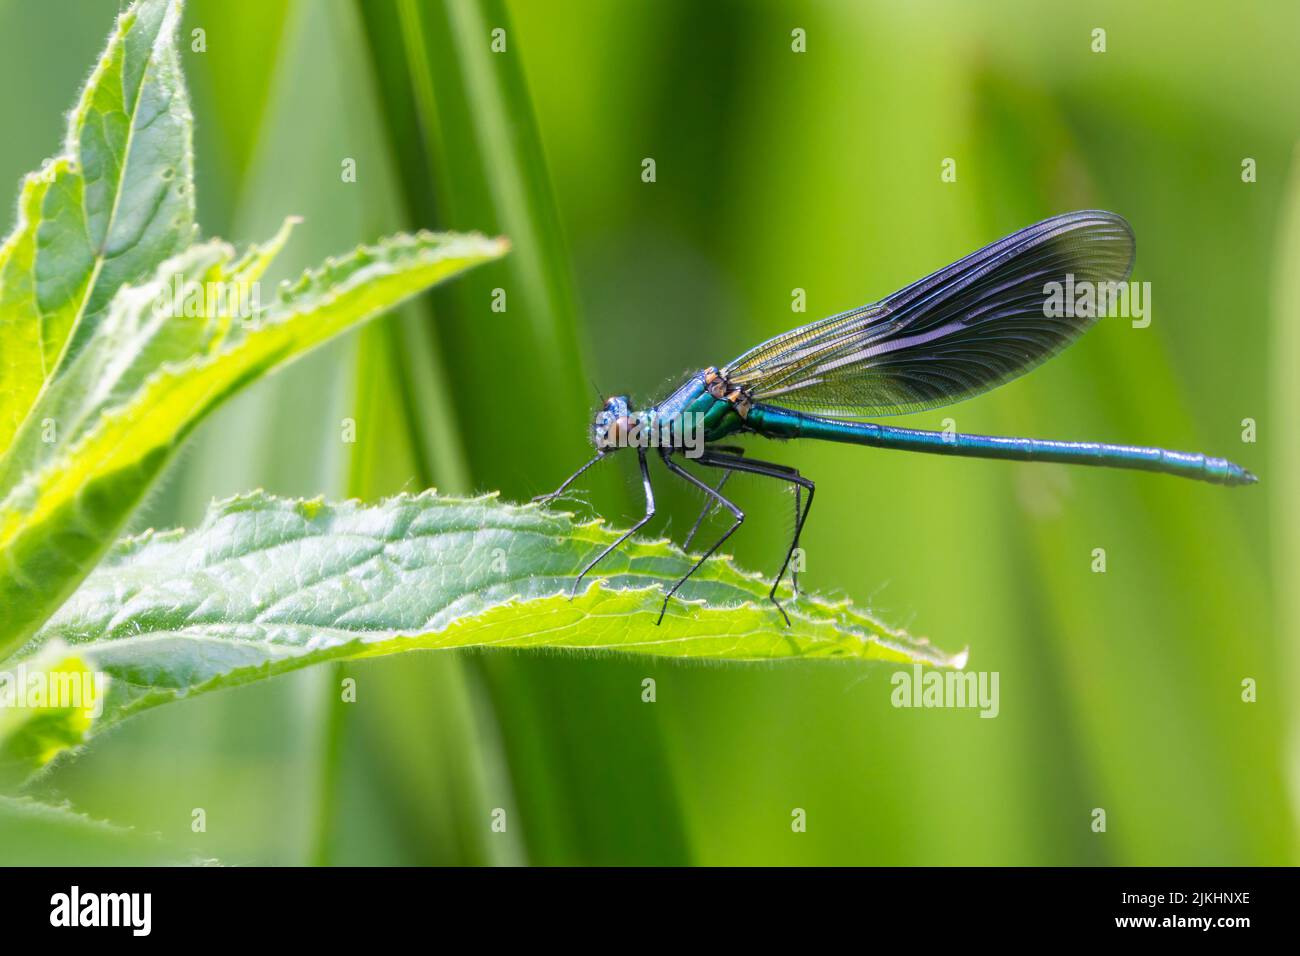 Banded demoiselle (calopteryx splendens) male damselfly with dark blue thumbprint shape on wings, metalic blue green body and small wide apart eyes Stock Photo